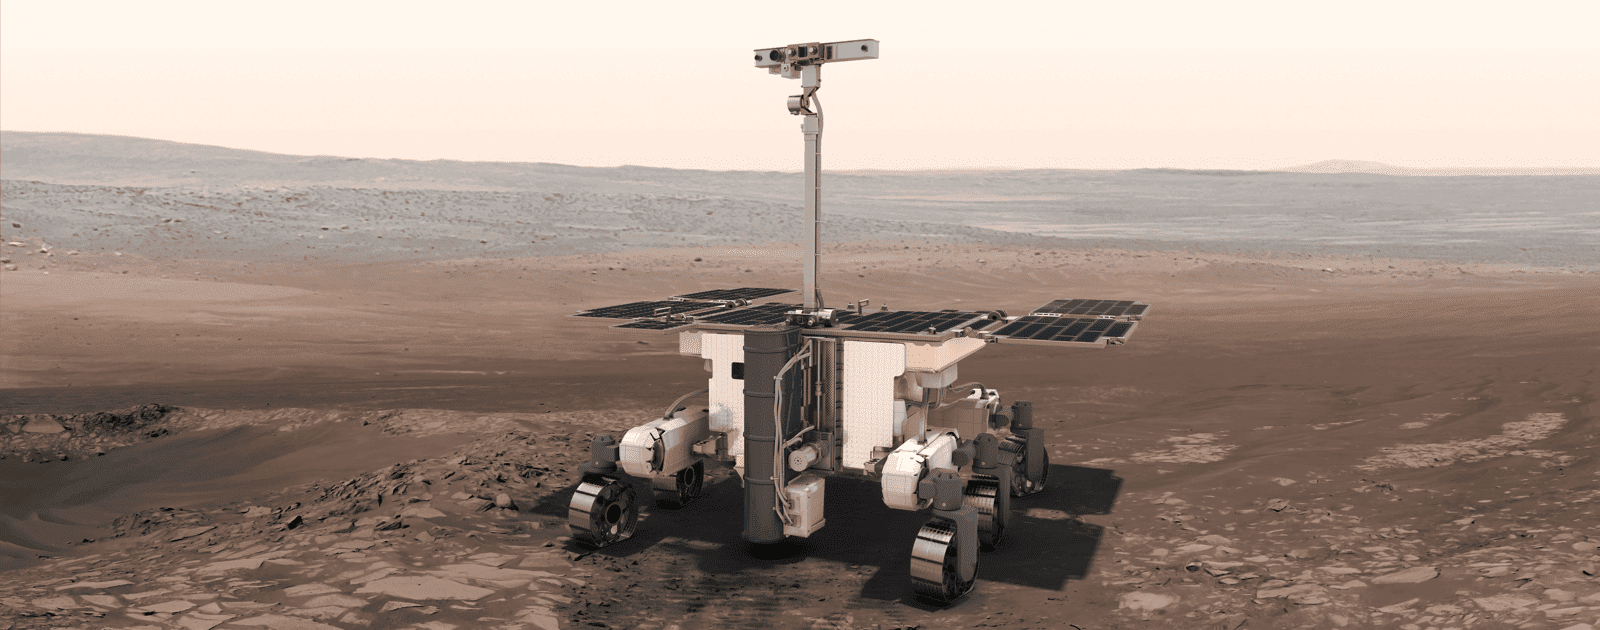 Want to Name the European Rover That Will Go to Mars in 2020?